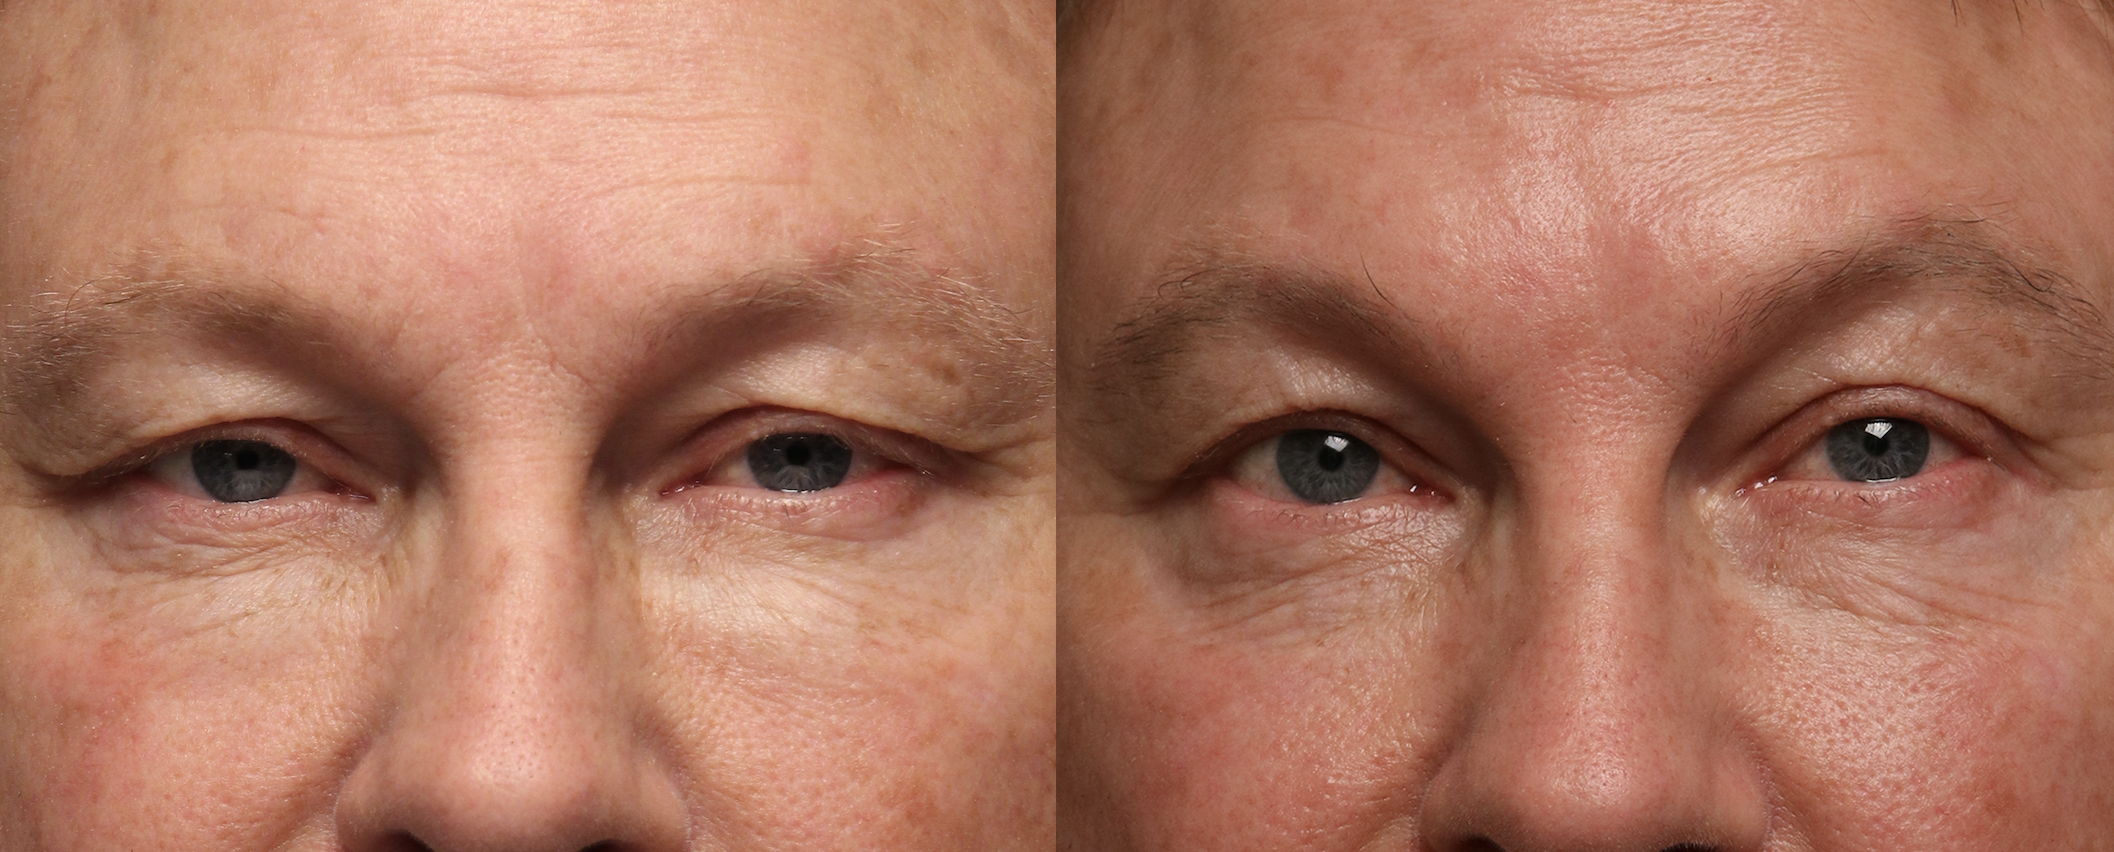 before and after image of a patient's eyes after morpheus8 treatment